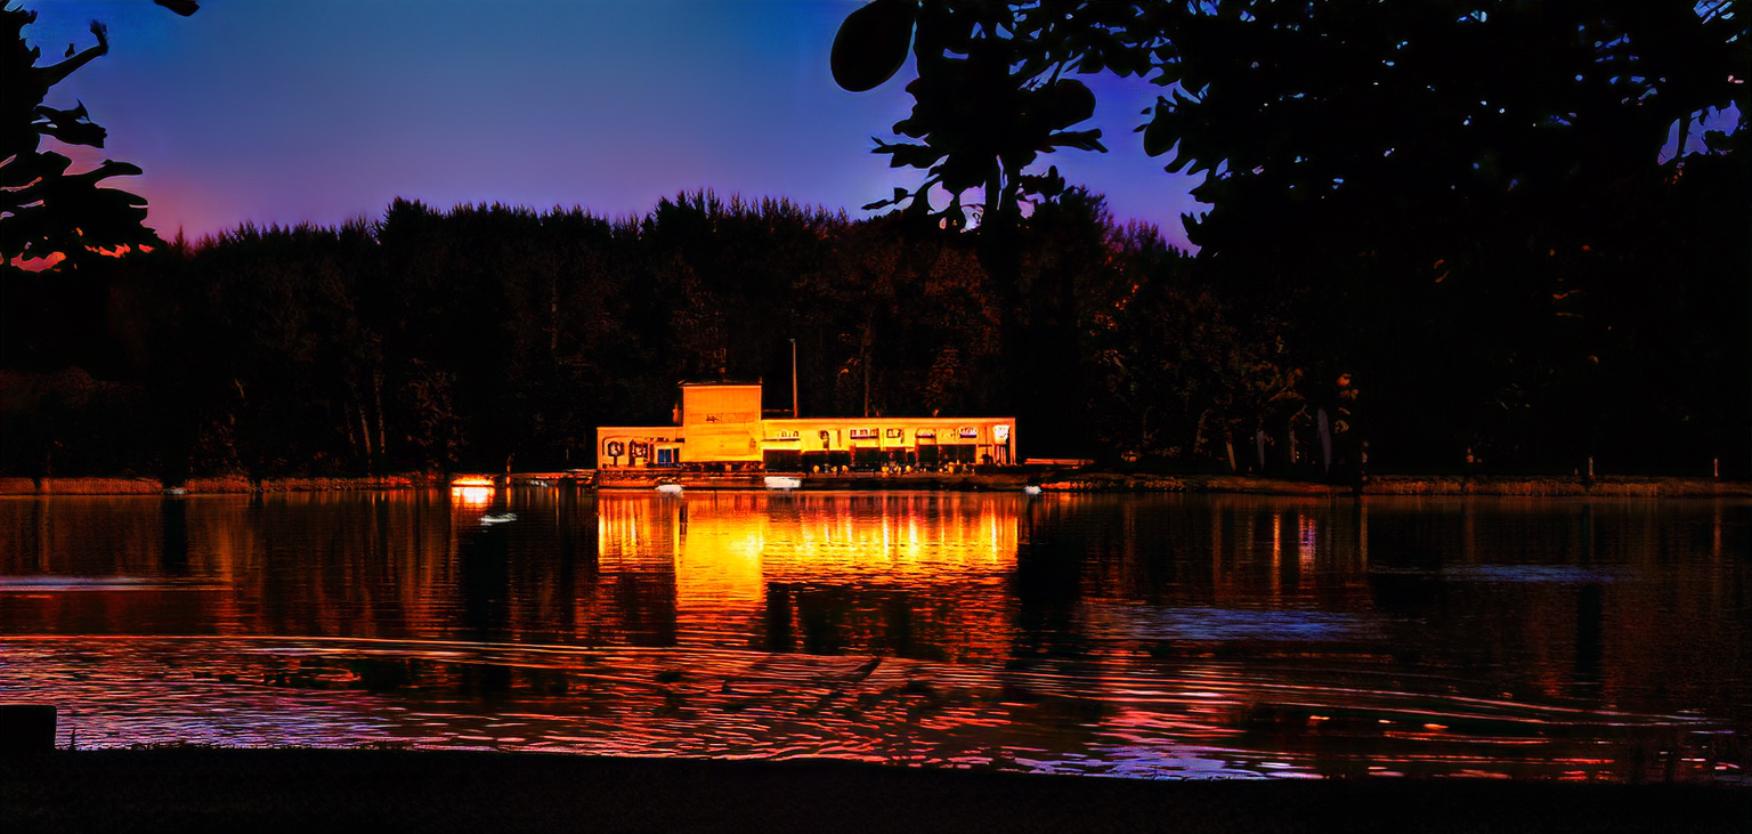 a photograph of lairds table at night. It shows the building lit up viewed from across the lake.